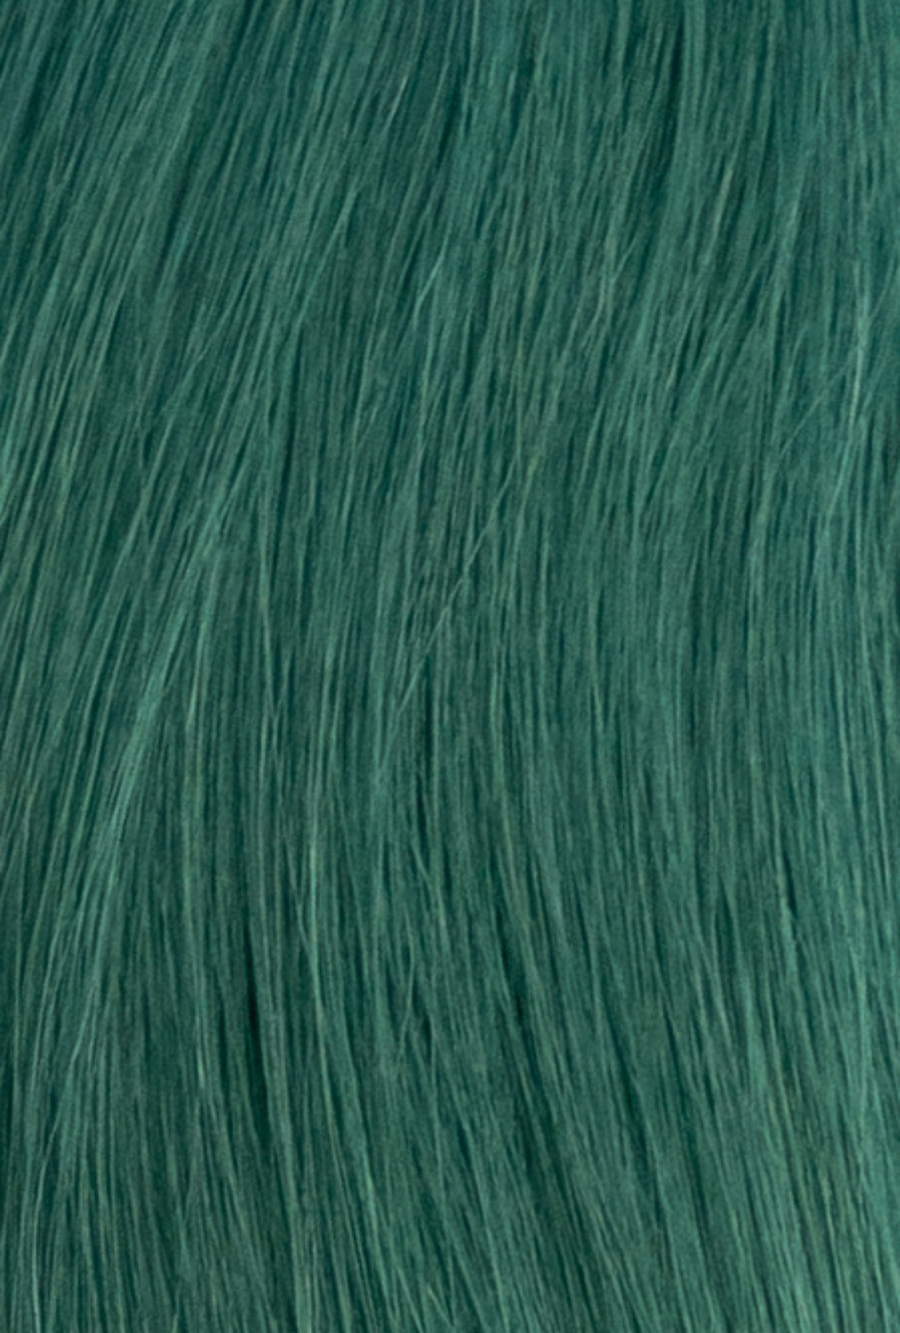 Laced Hair Tape-In Extensions Seafoam